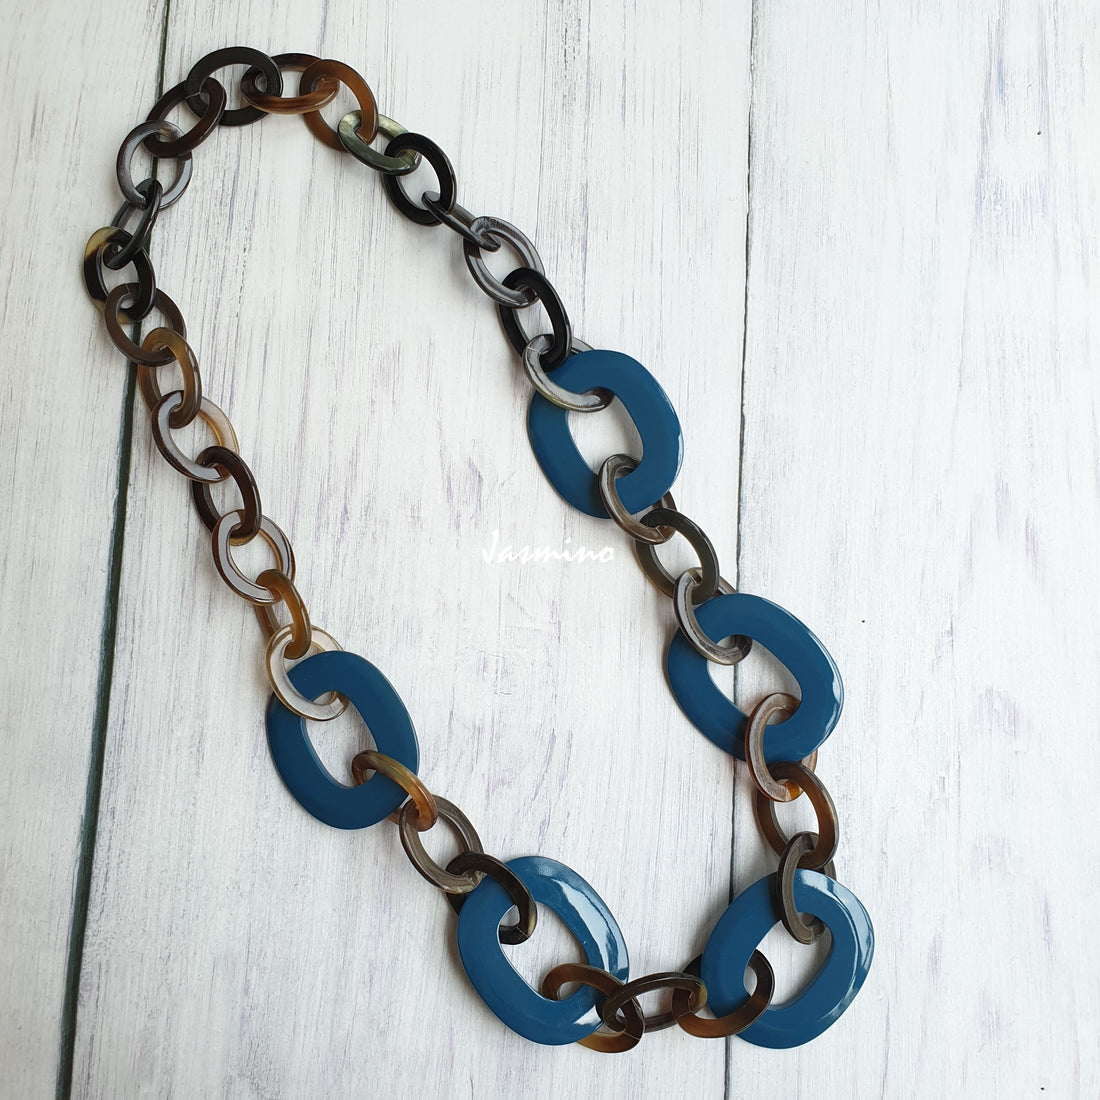 Jasmino unique handmade wide chain necklace features large blue ovals in natural buffalo horn for women